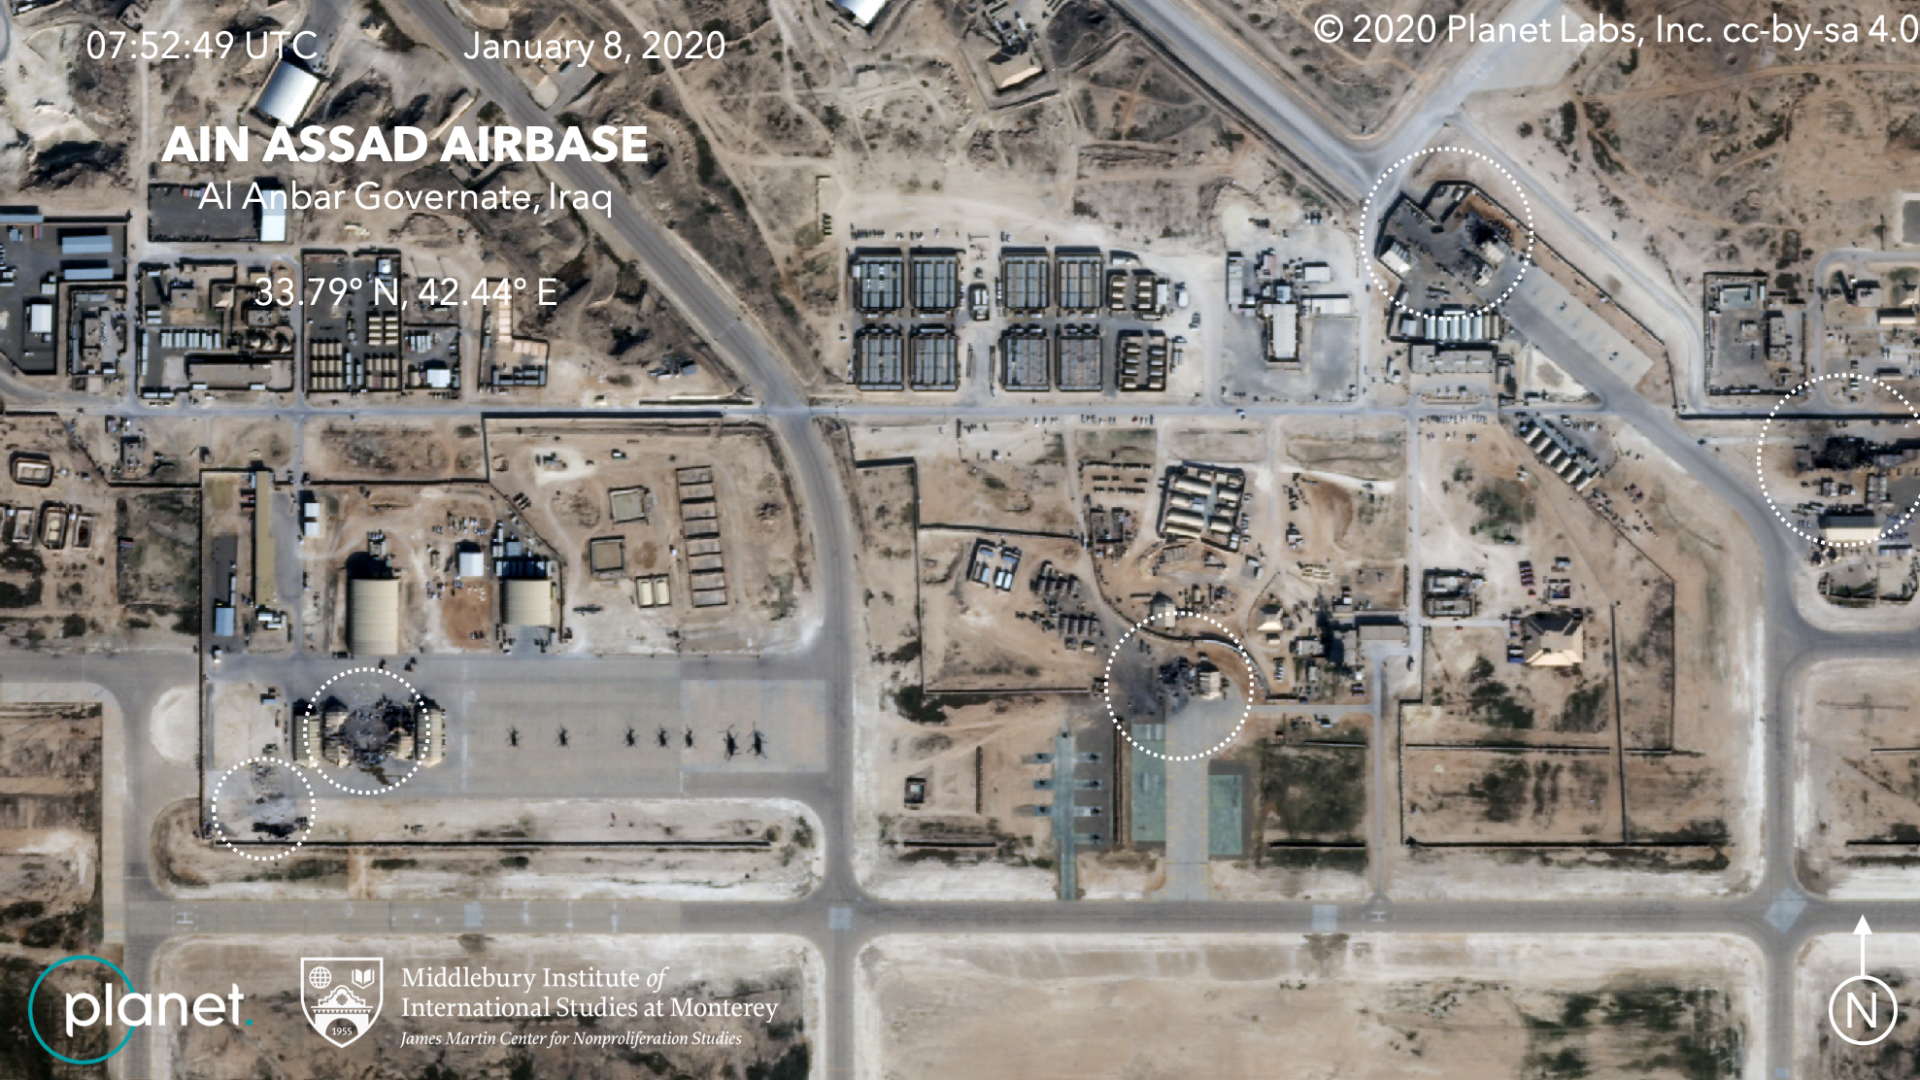 Satellite images show damage to hangars and buildings in what appears to be a series of precision missile strikes launched by Iran.